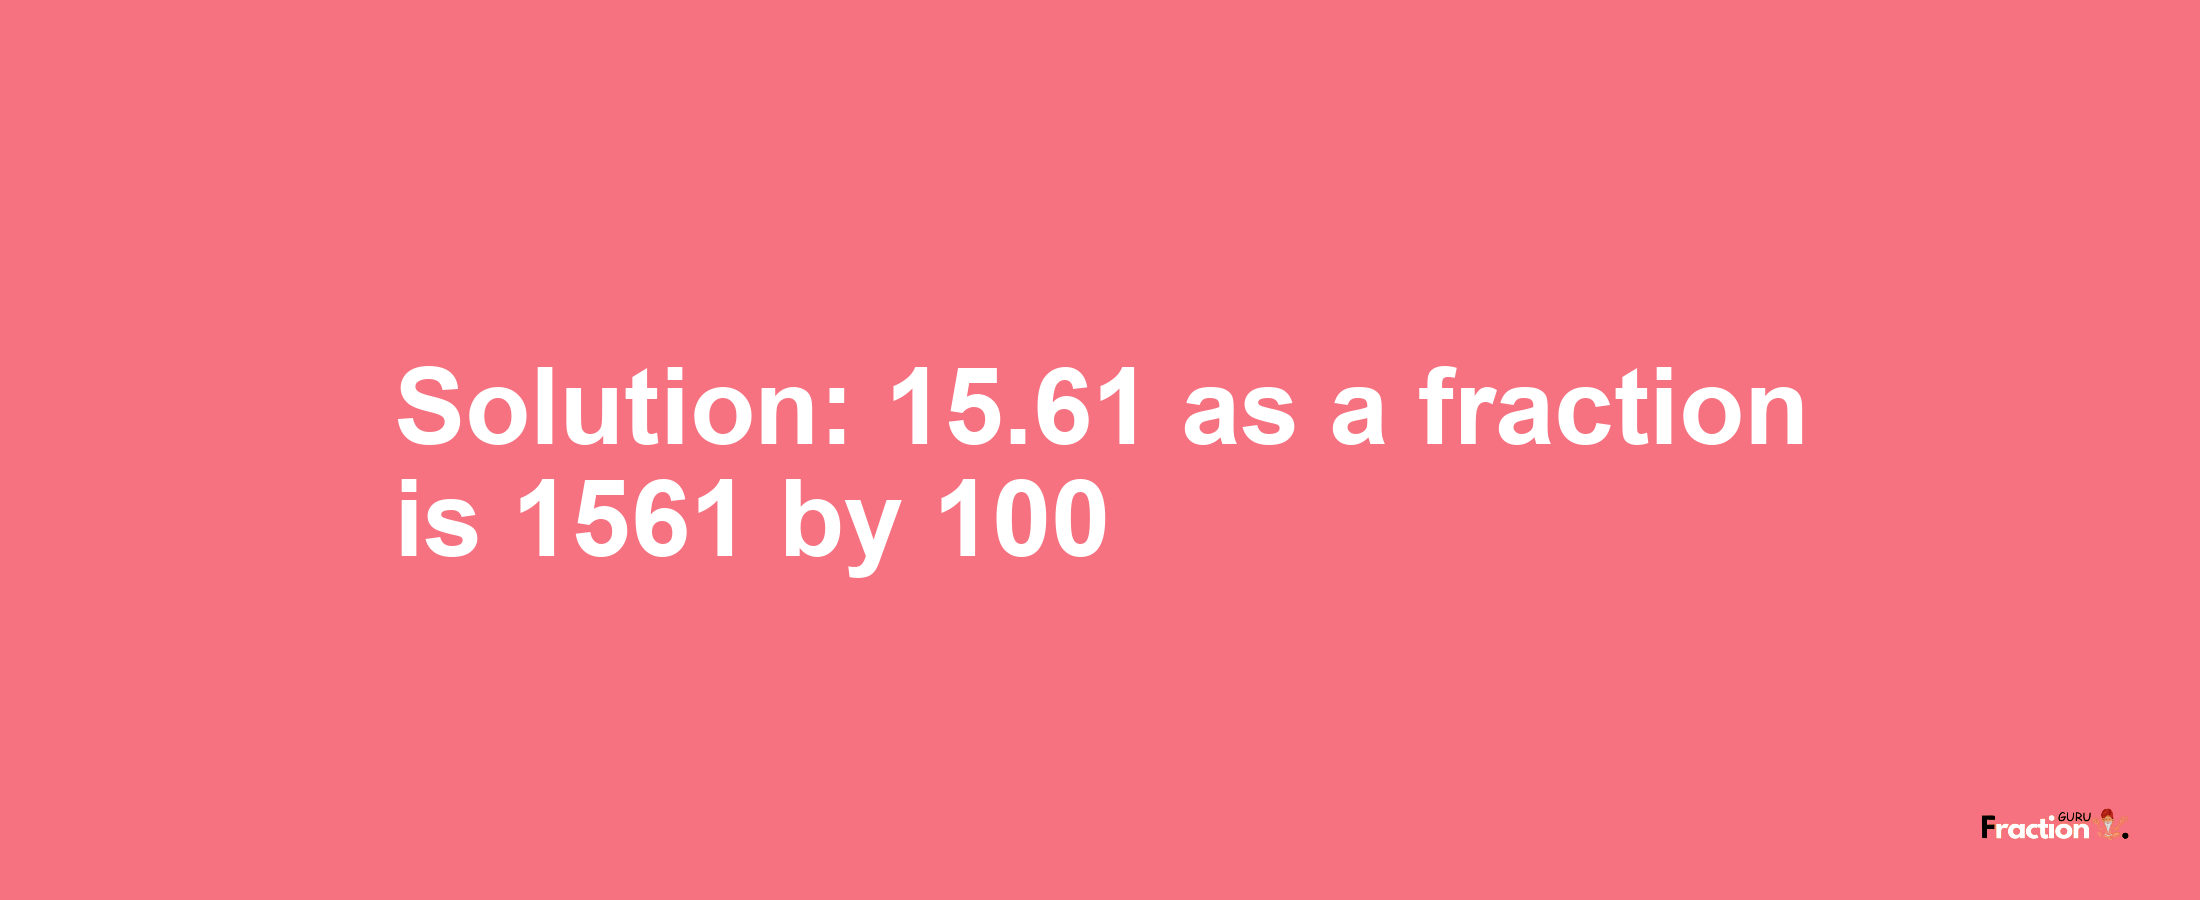 Solution:15.61 as a fraction is 1561/100